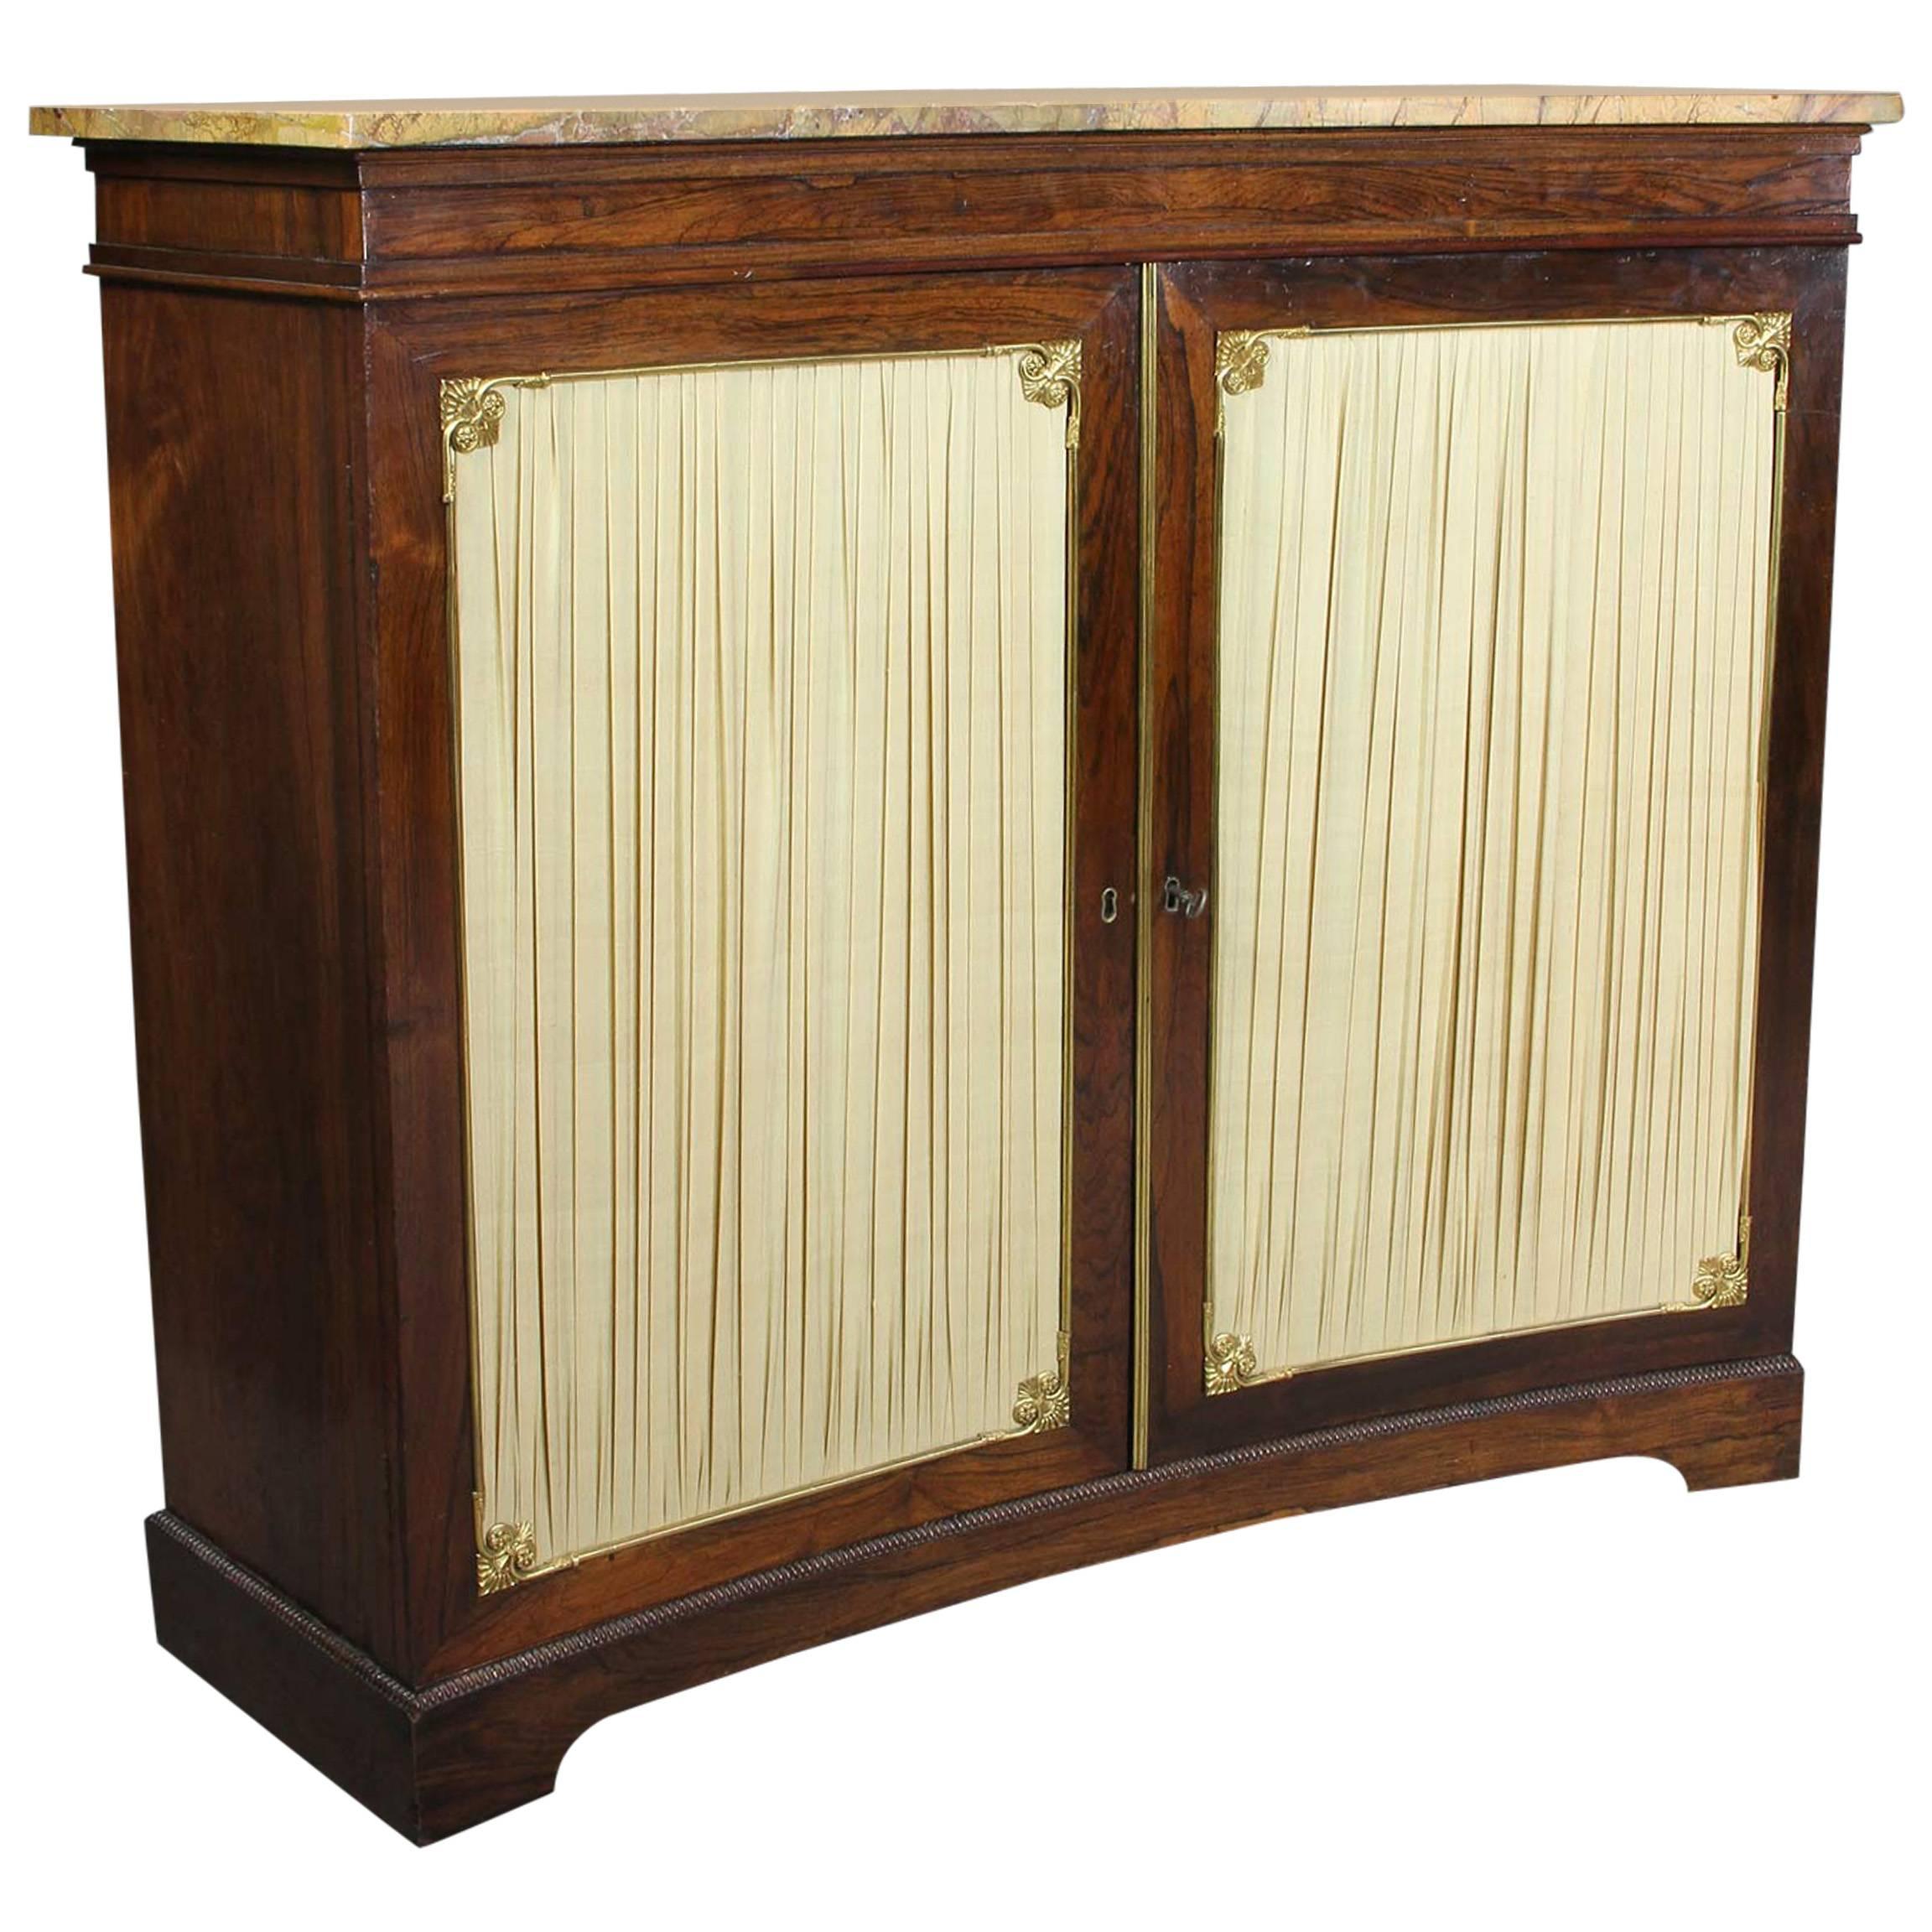 Regency Rosewood and Brass-Mounted Credenza